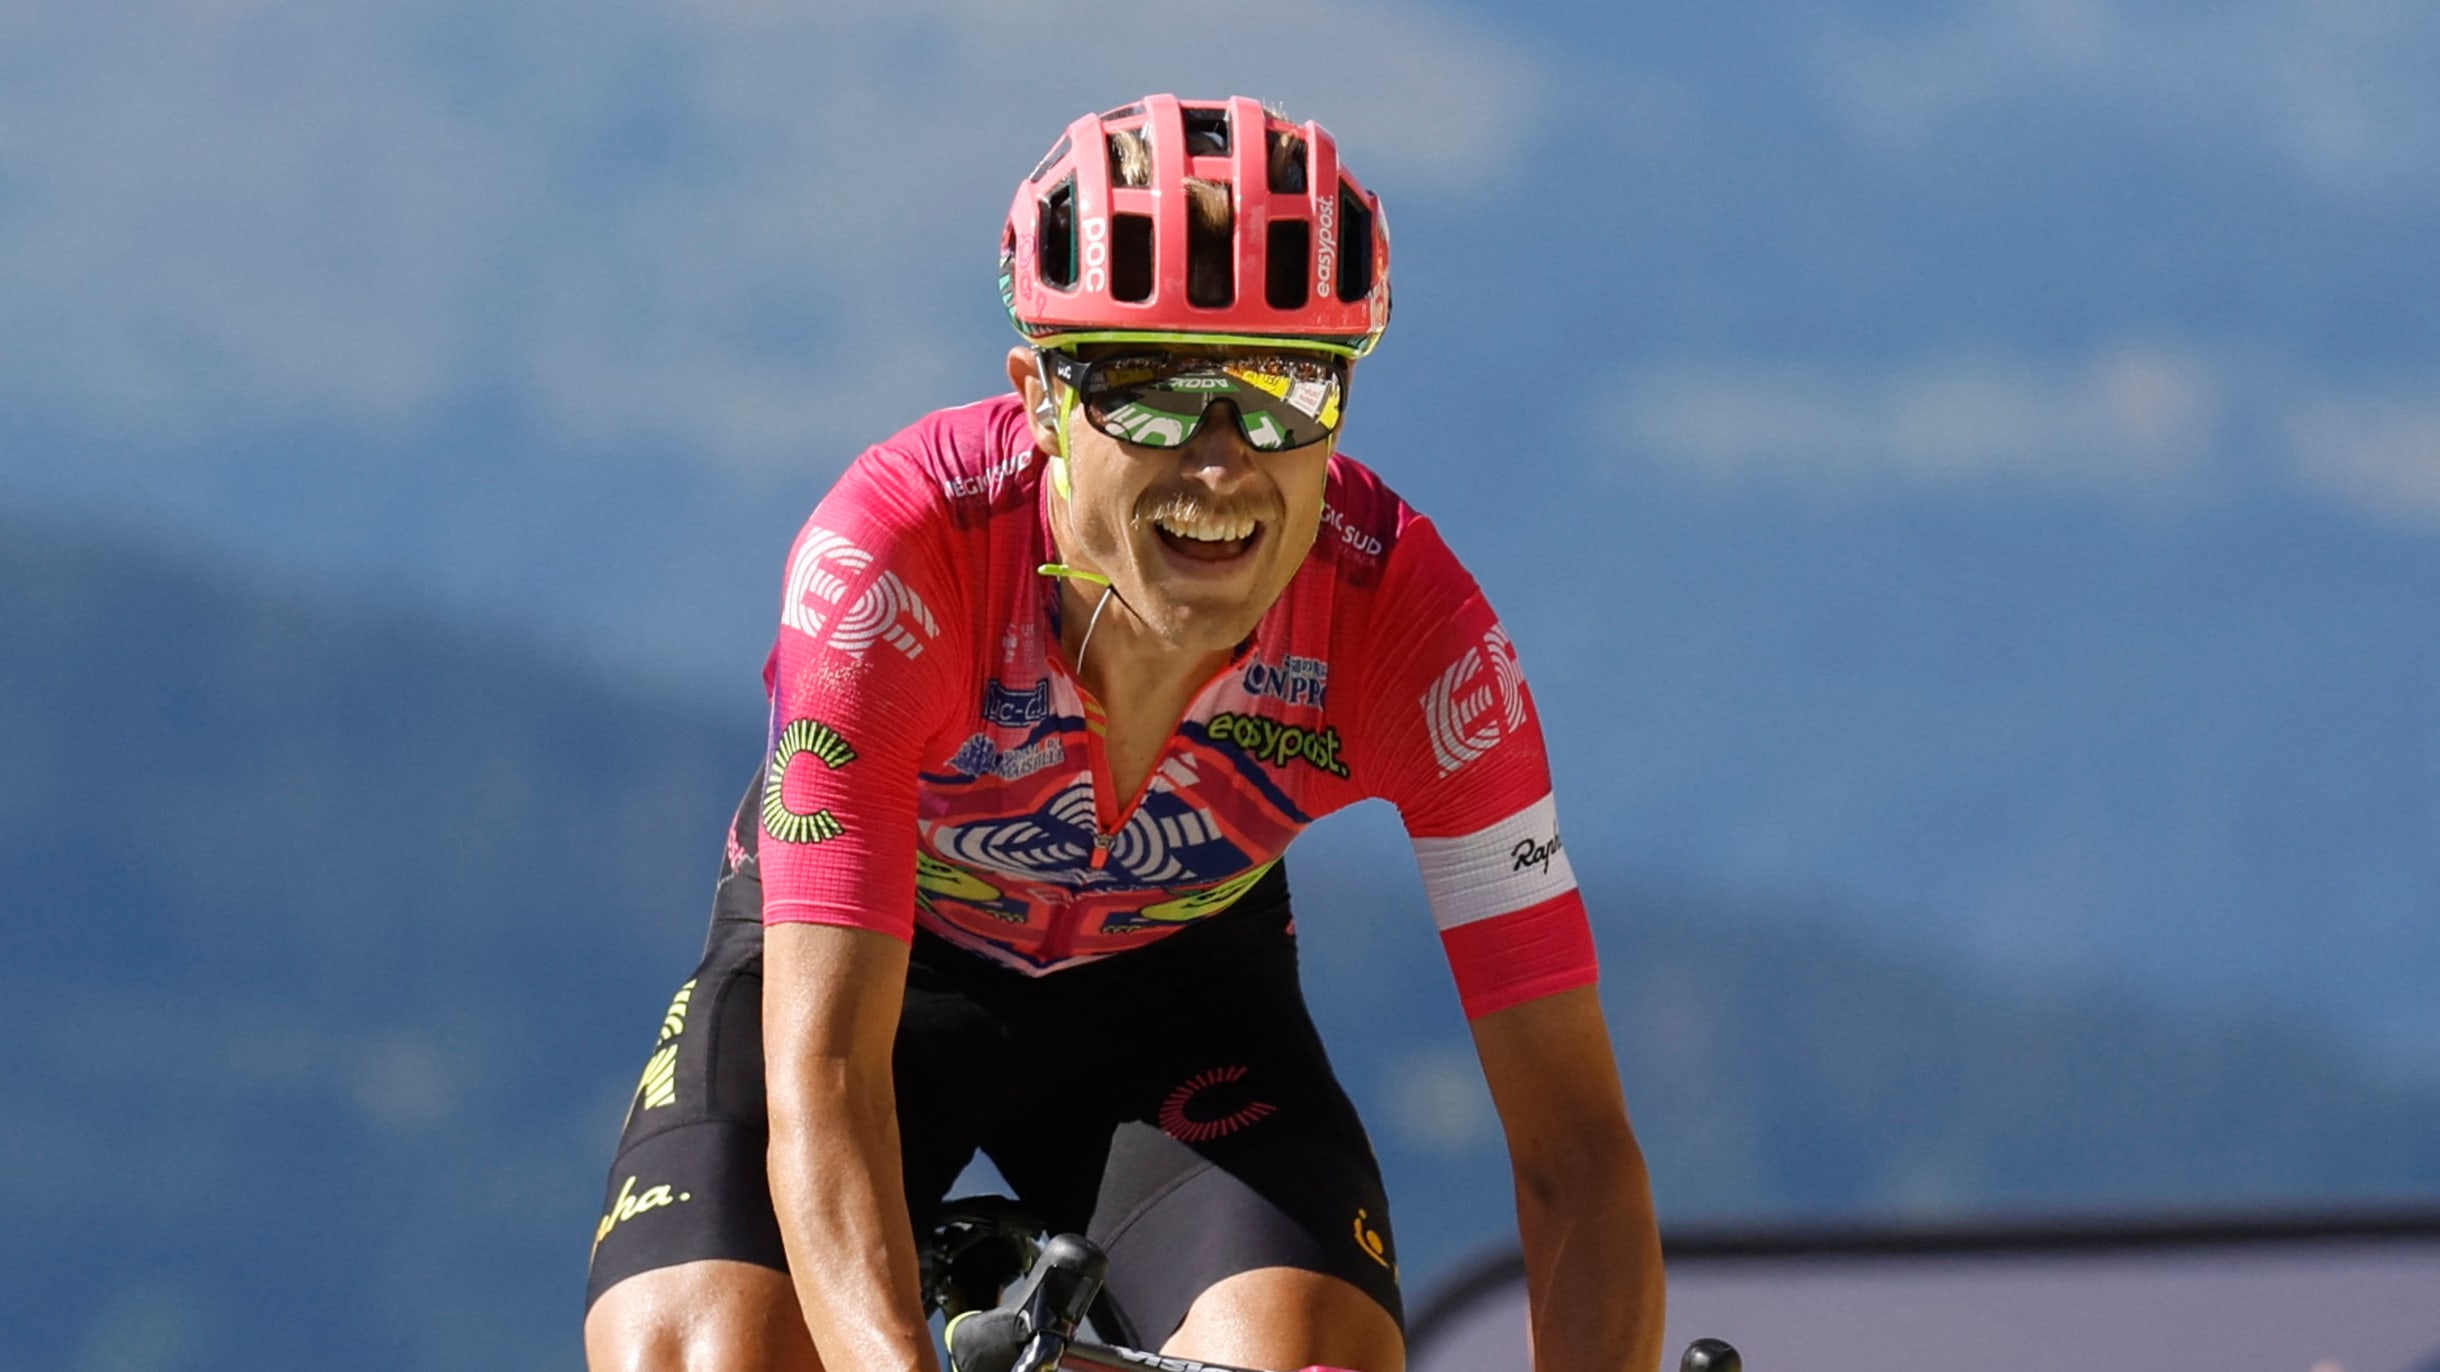 Tour France 2022 - Magnus Cort wins stage 10 as Pogacar keeps overall lead - Results